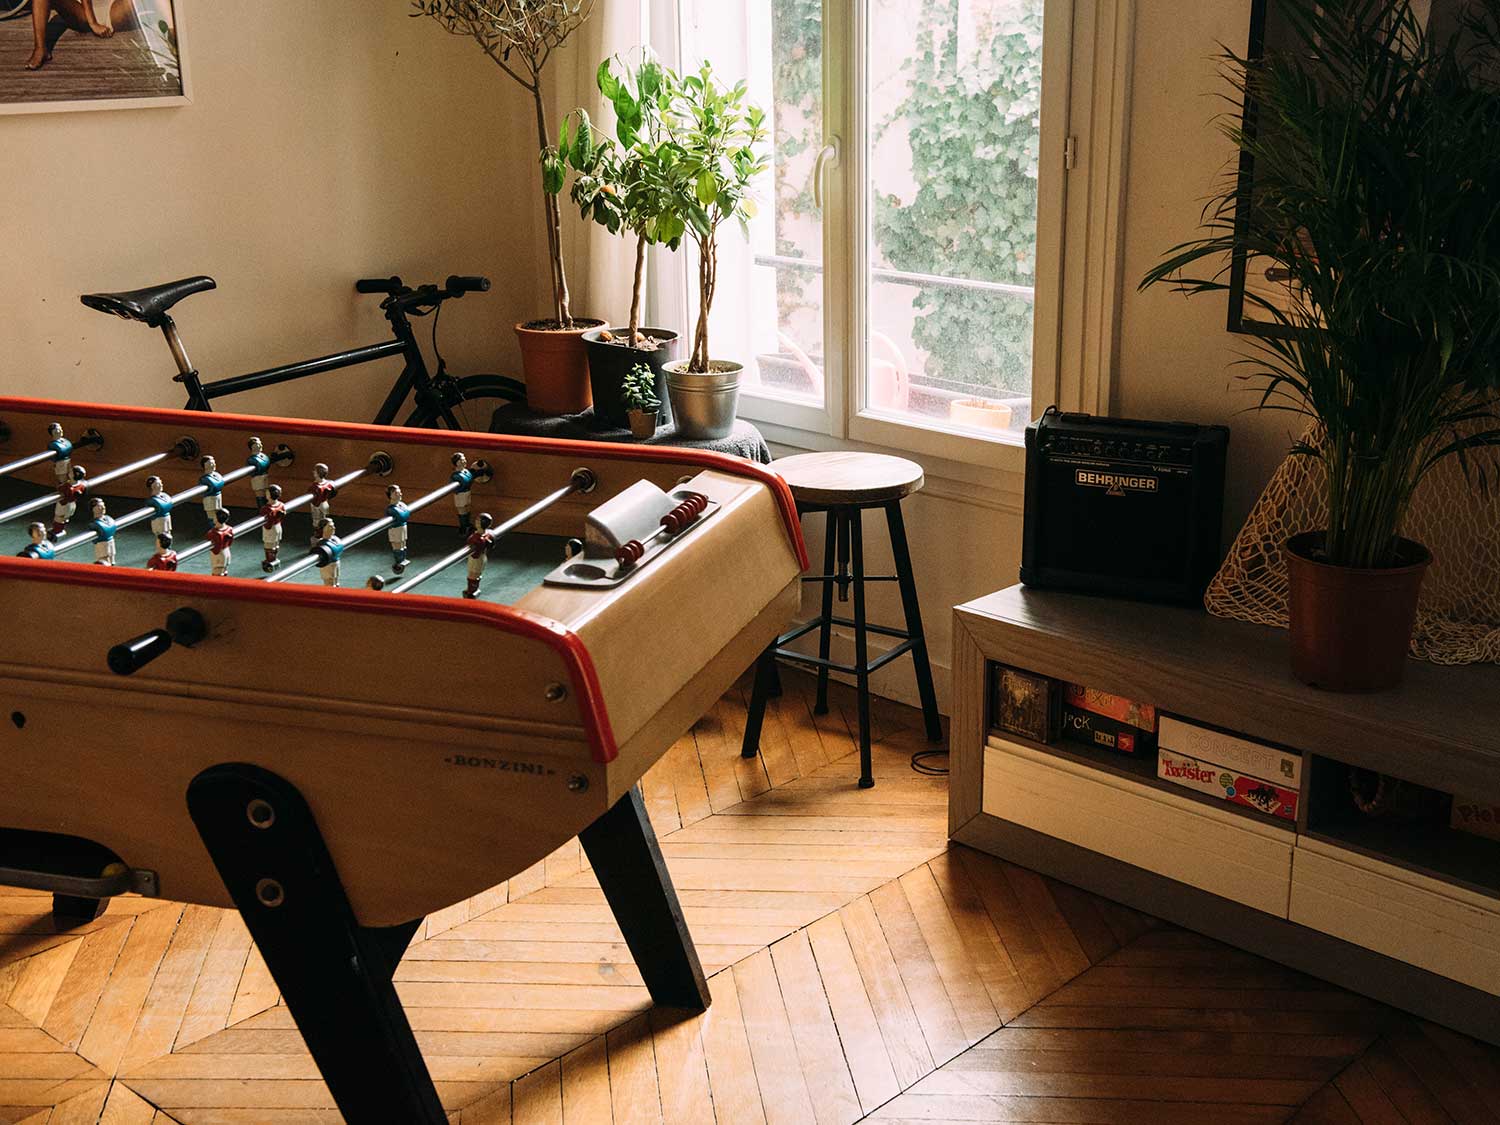 Foosball tables that will liven up any space